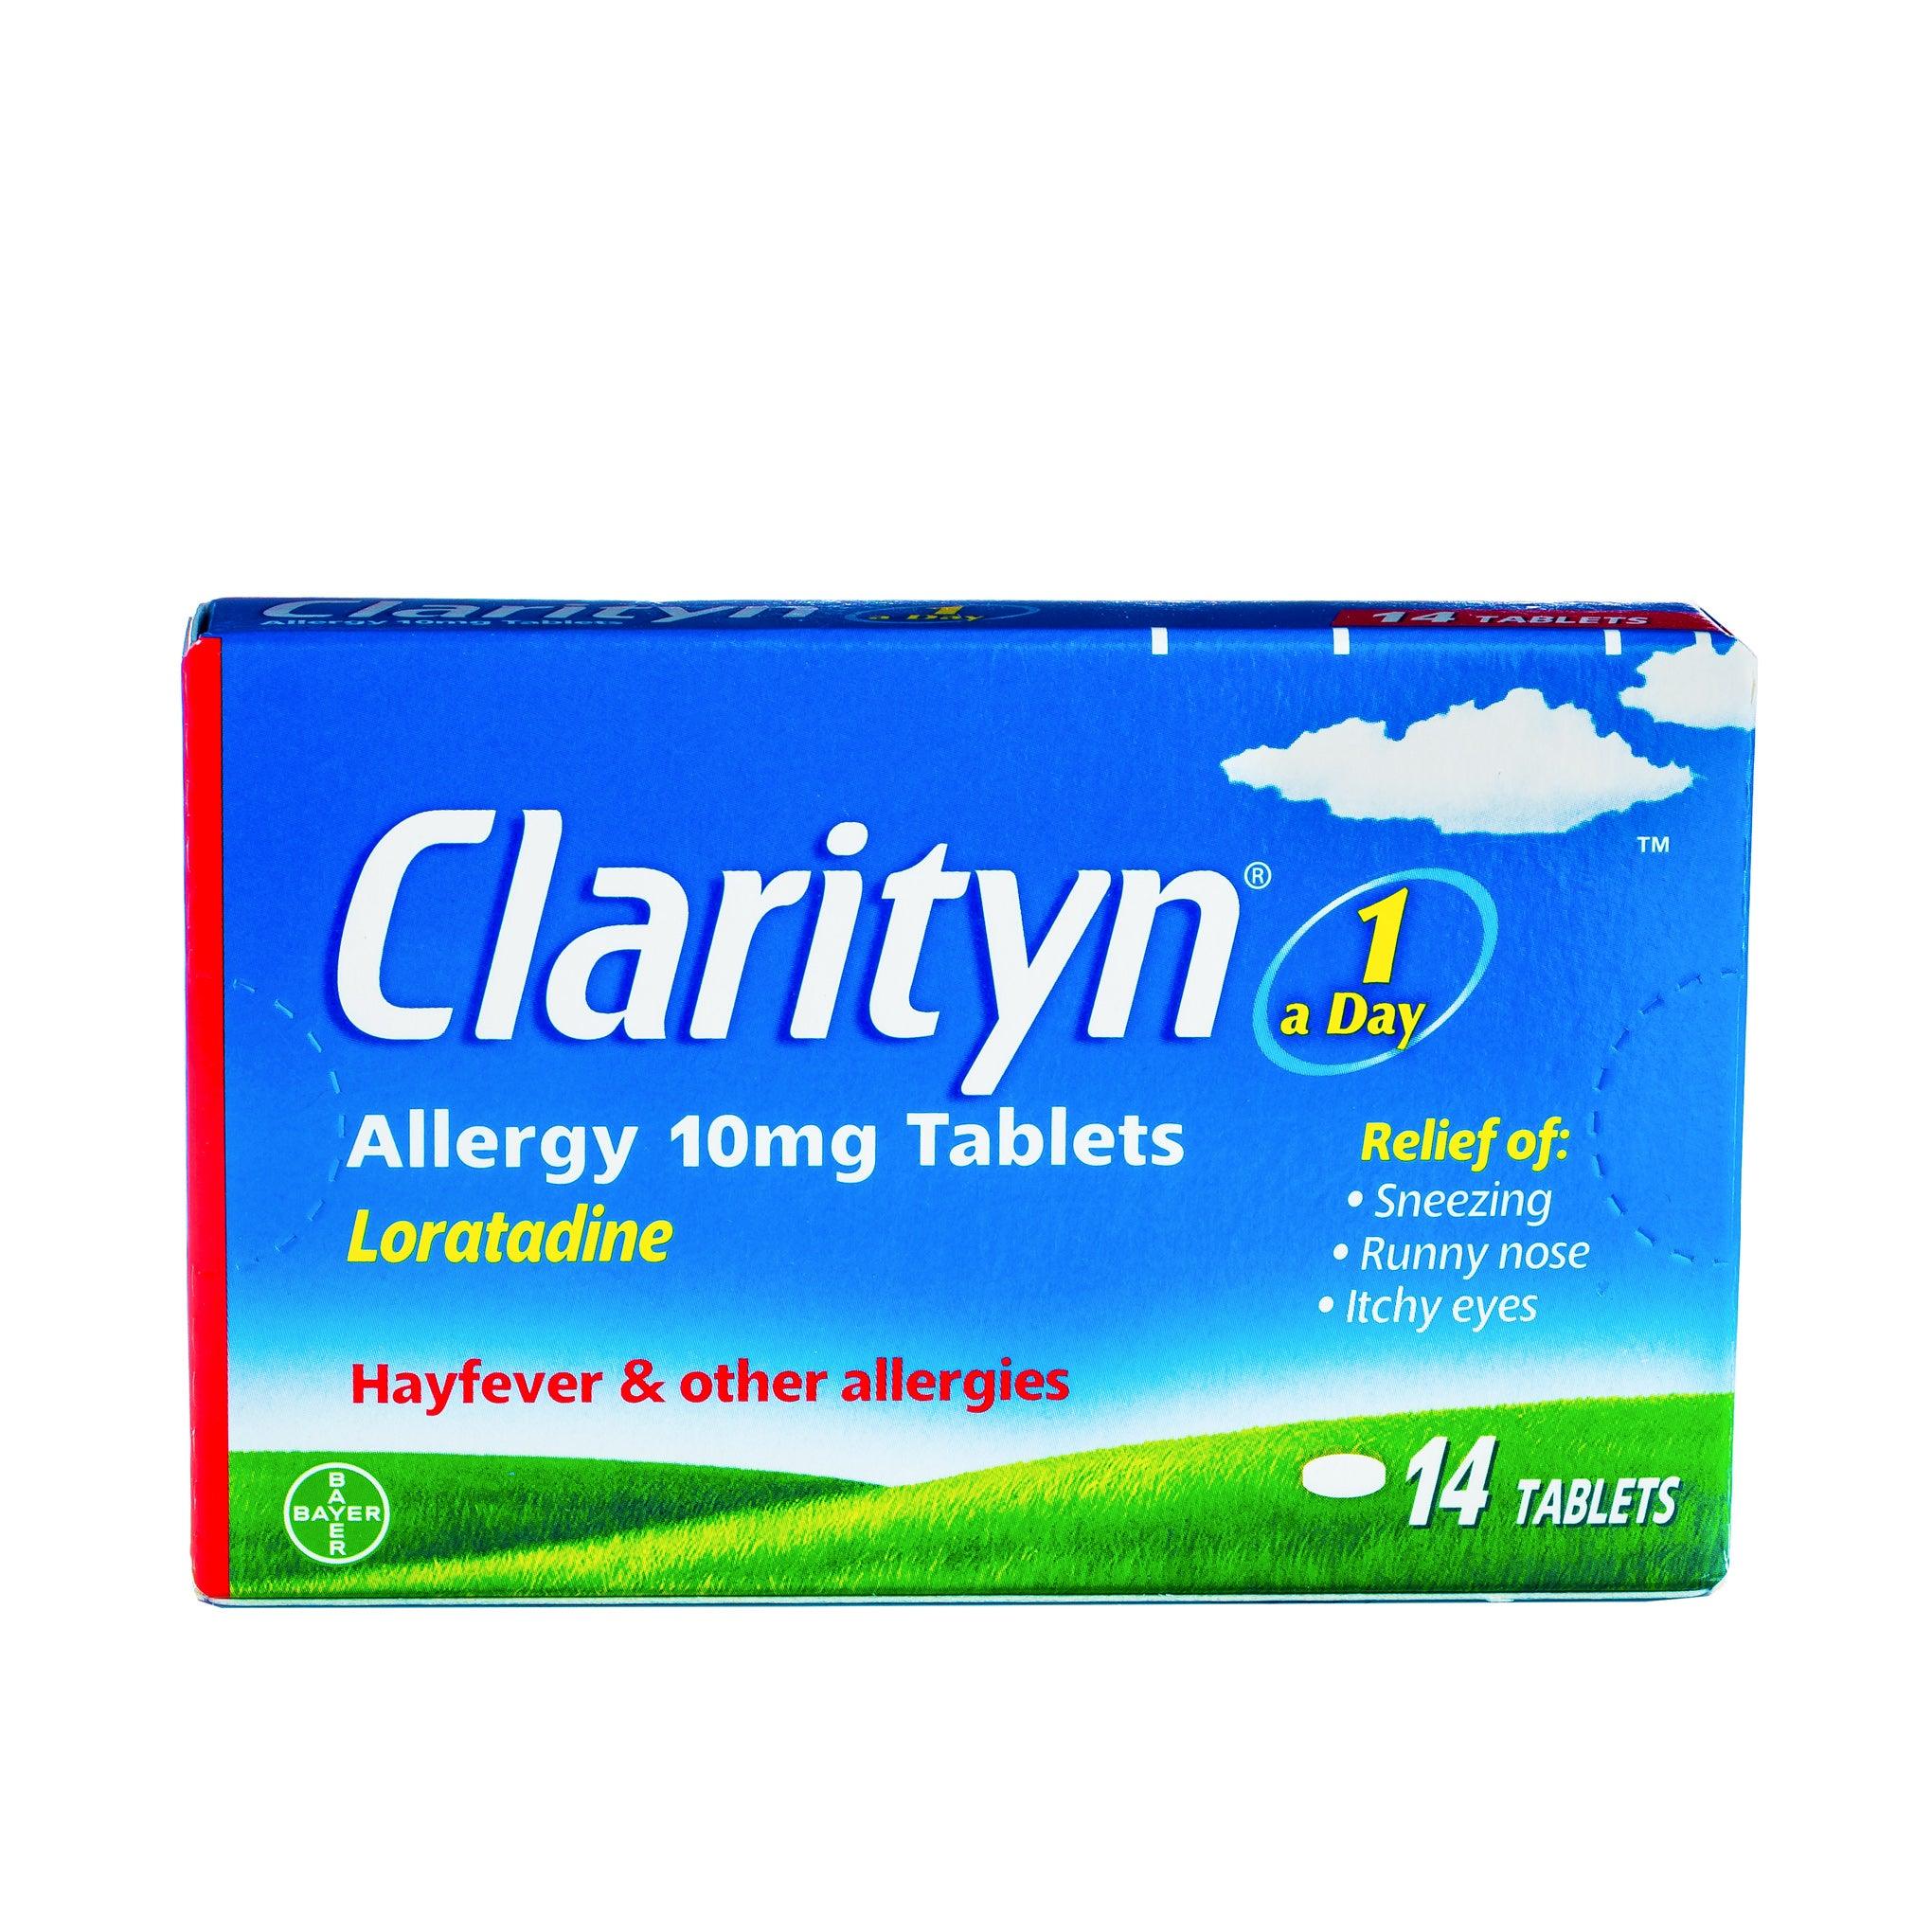 shop Clarityn (Loratadine) Allergy Relief 10mg Tabs x14 from HealthPlus online pharmacy in Nigeria